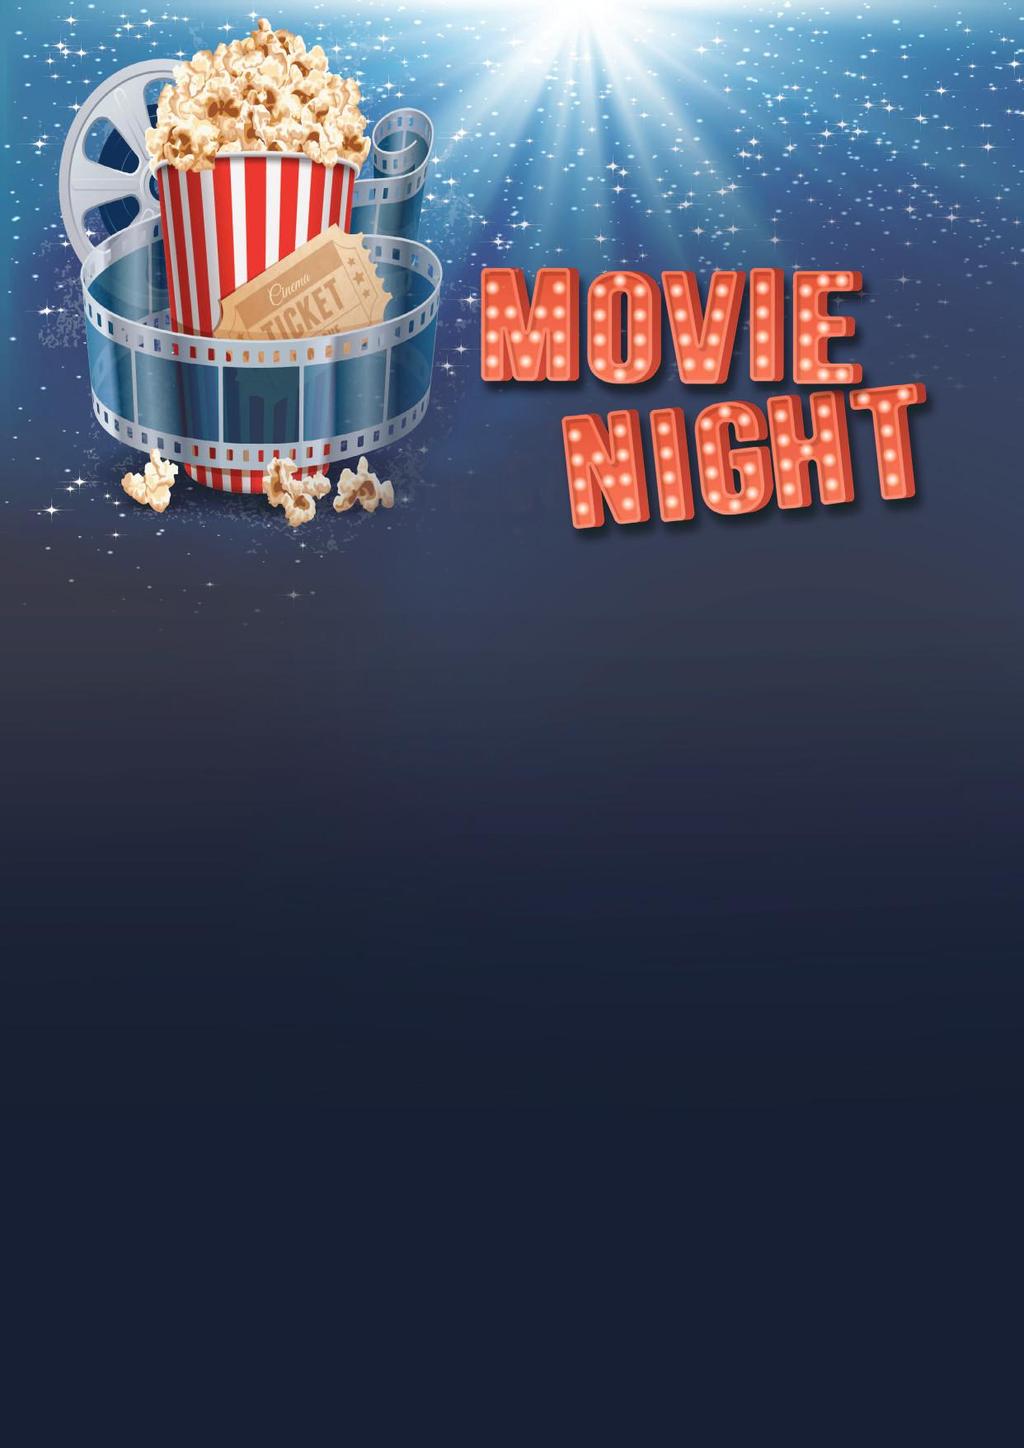 THE PTA INVITES YOU TO ST HELIERS SCHOOL FRIDAY 22 JUNE Our next movie night will be held on 22 June,